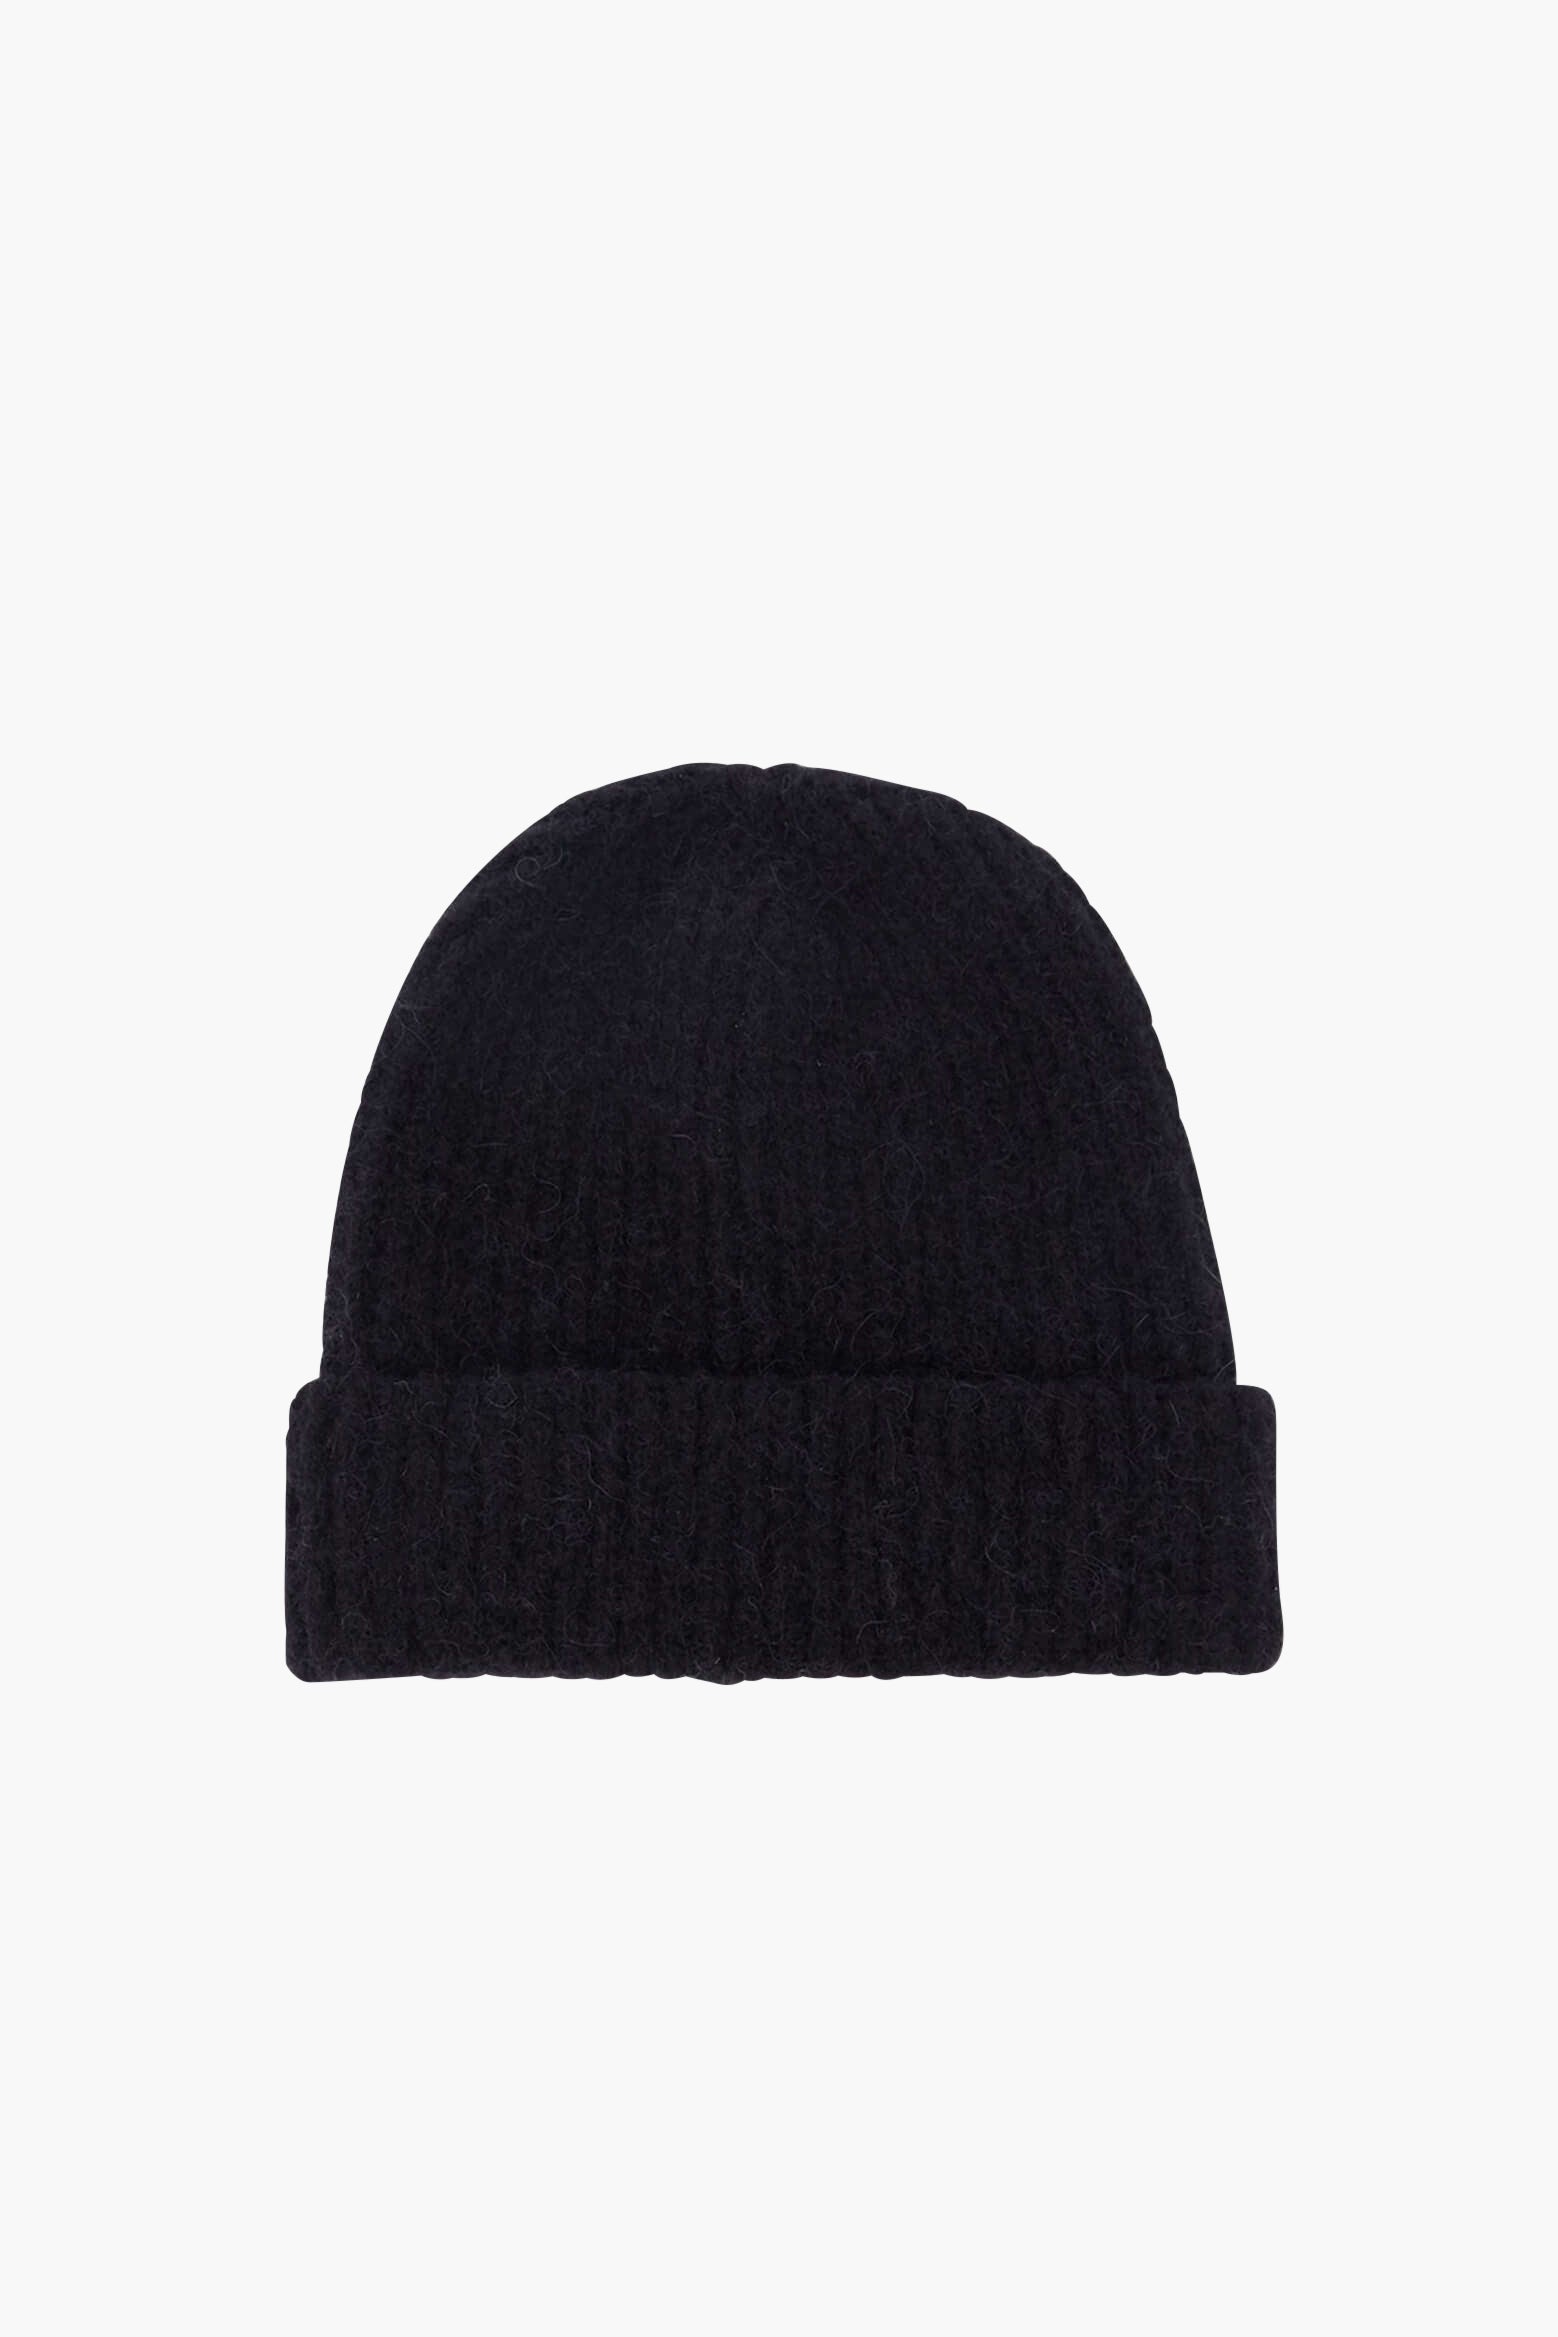 Janessa Leone Piper Beanie in Black from The New Trend